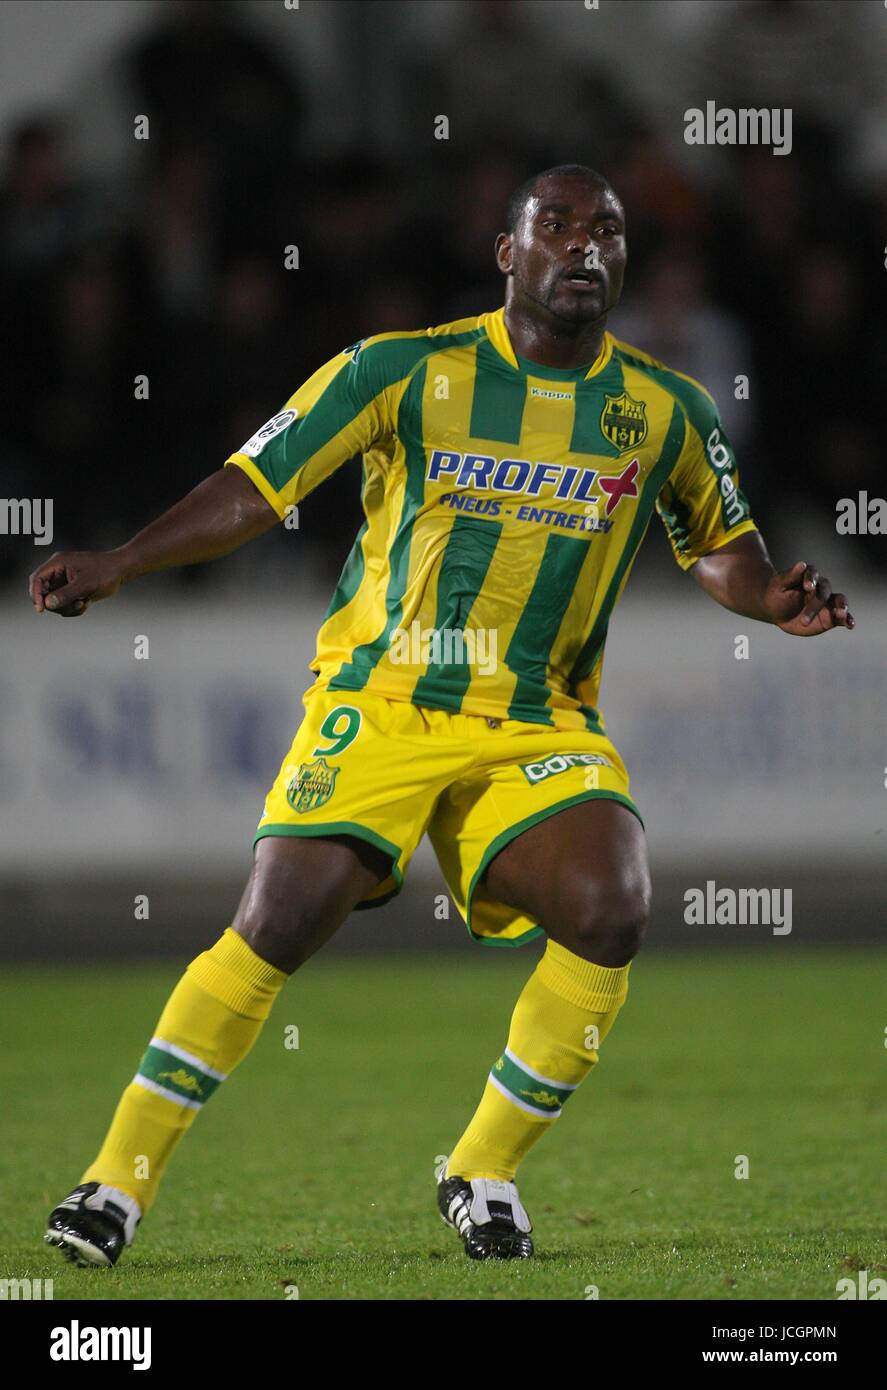 JEAN-CLAUDE DARCHEVILLE FC NANTES NANTES V NORTH KOREA STADE  HENRI-DESGRANGE, LA ROCHE SUR YON, FRANCE 09 October 2009 GAA815 WARNING!  This Photograph May Only Be Used For Newspaper And/Or Magazine Editorial  Purposes.